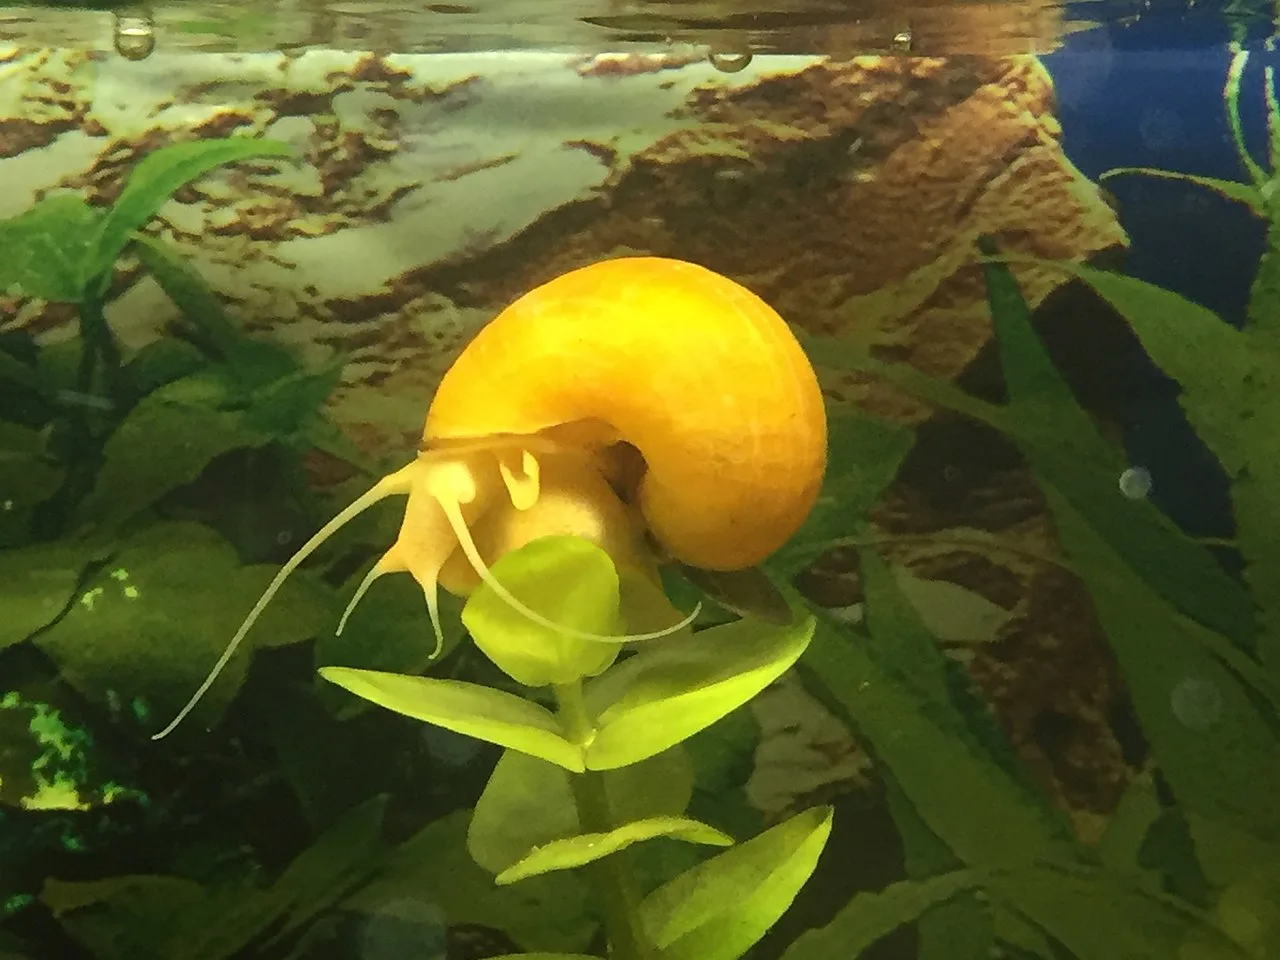 yellow apple snail in water - florida snail kite sermon for easter